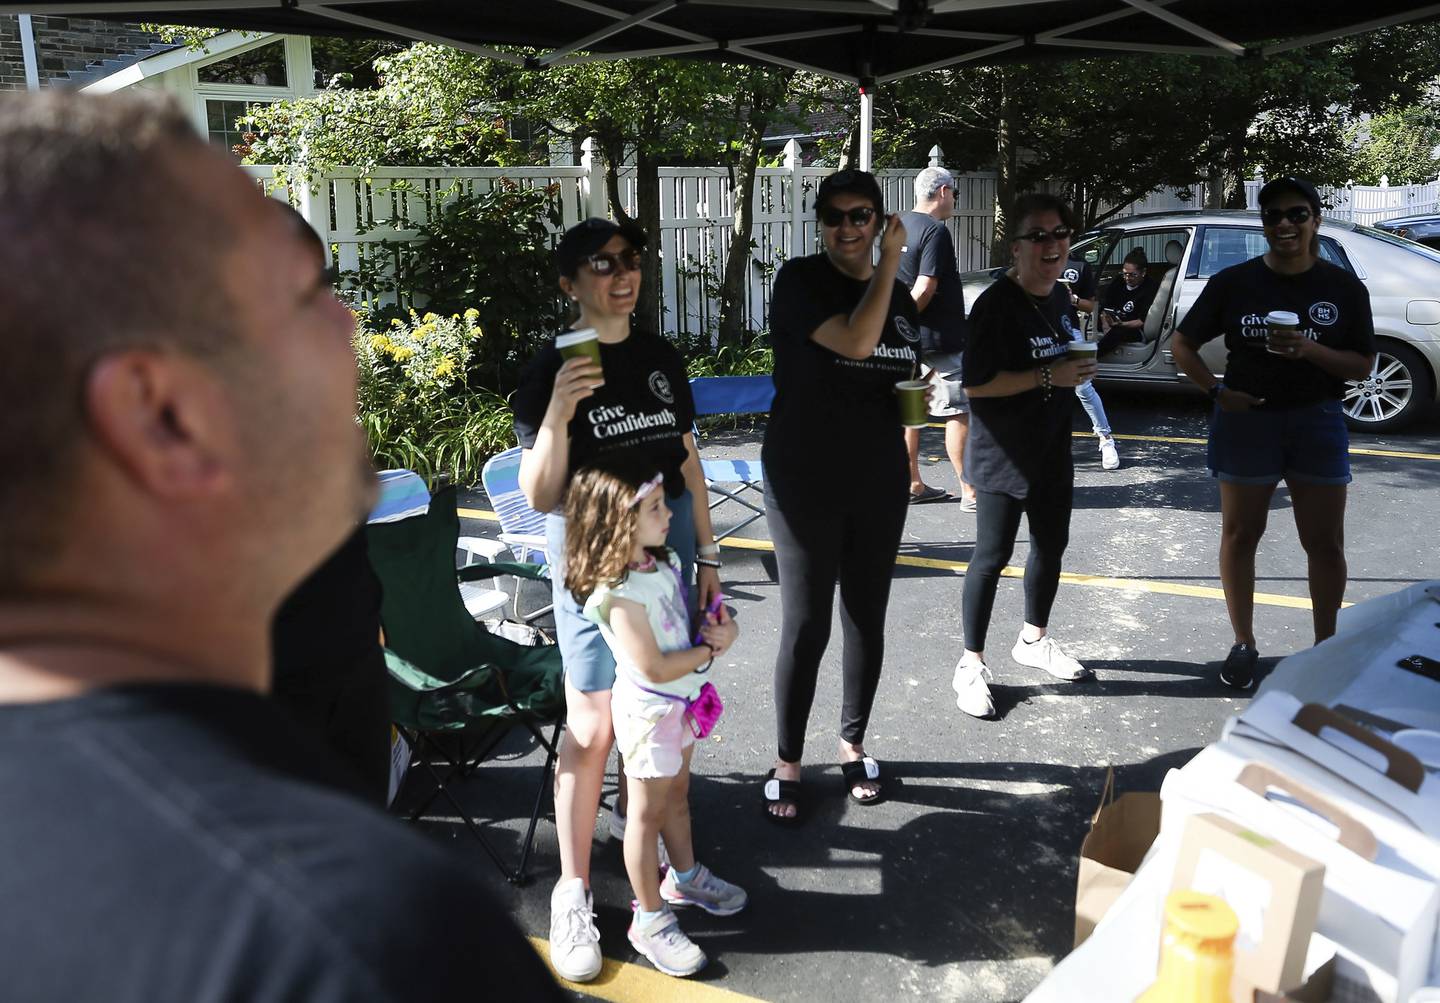 Employees of Berkshire Hathaway HomeServices Chicago listen to John Lawrence, a vice president in Berkshire's Oak Park office, while working a community shred event at First Presbyterian Church in River Forest on Sept. 17, 2022.